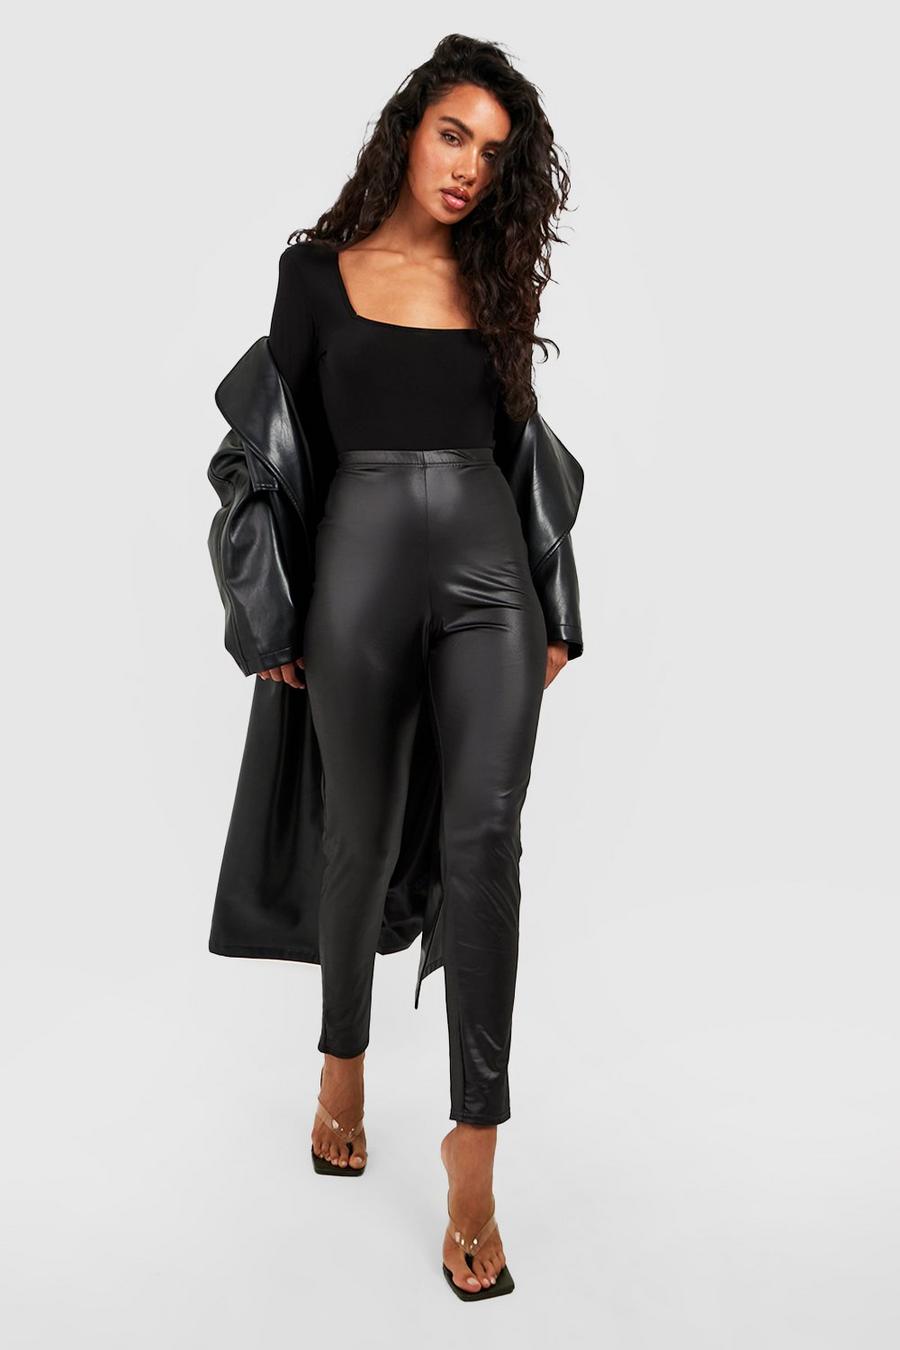 Black High Waisted Leather Look Stretch Leggings